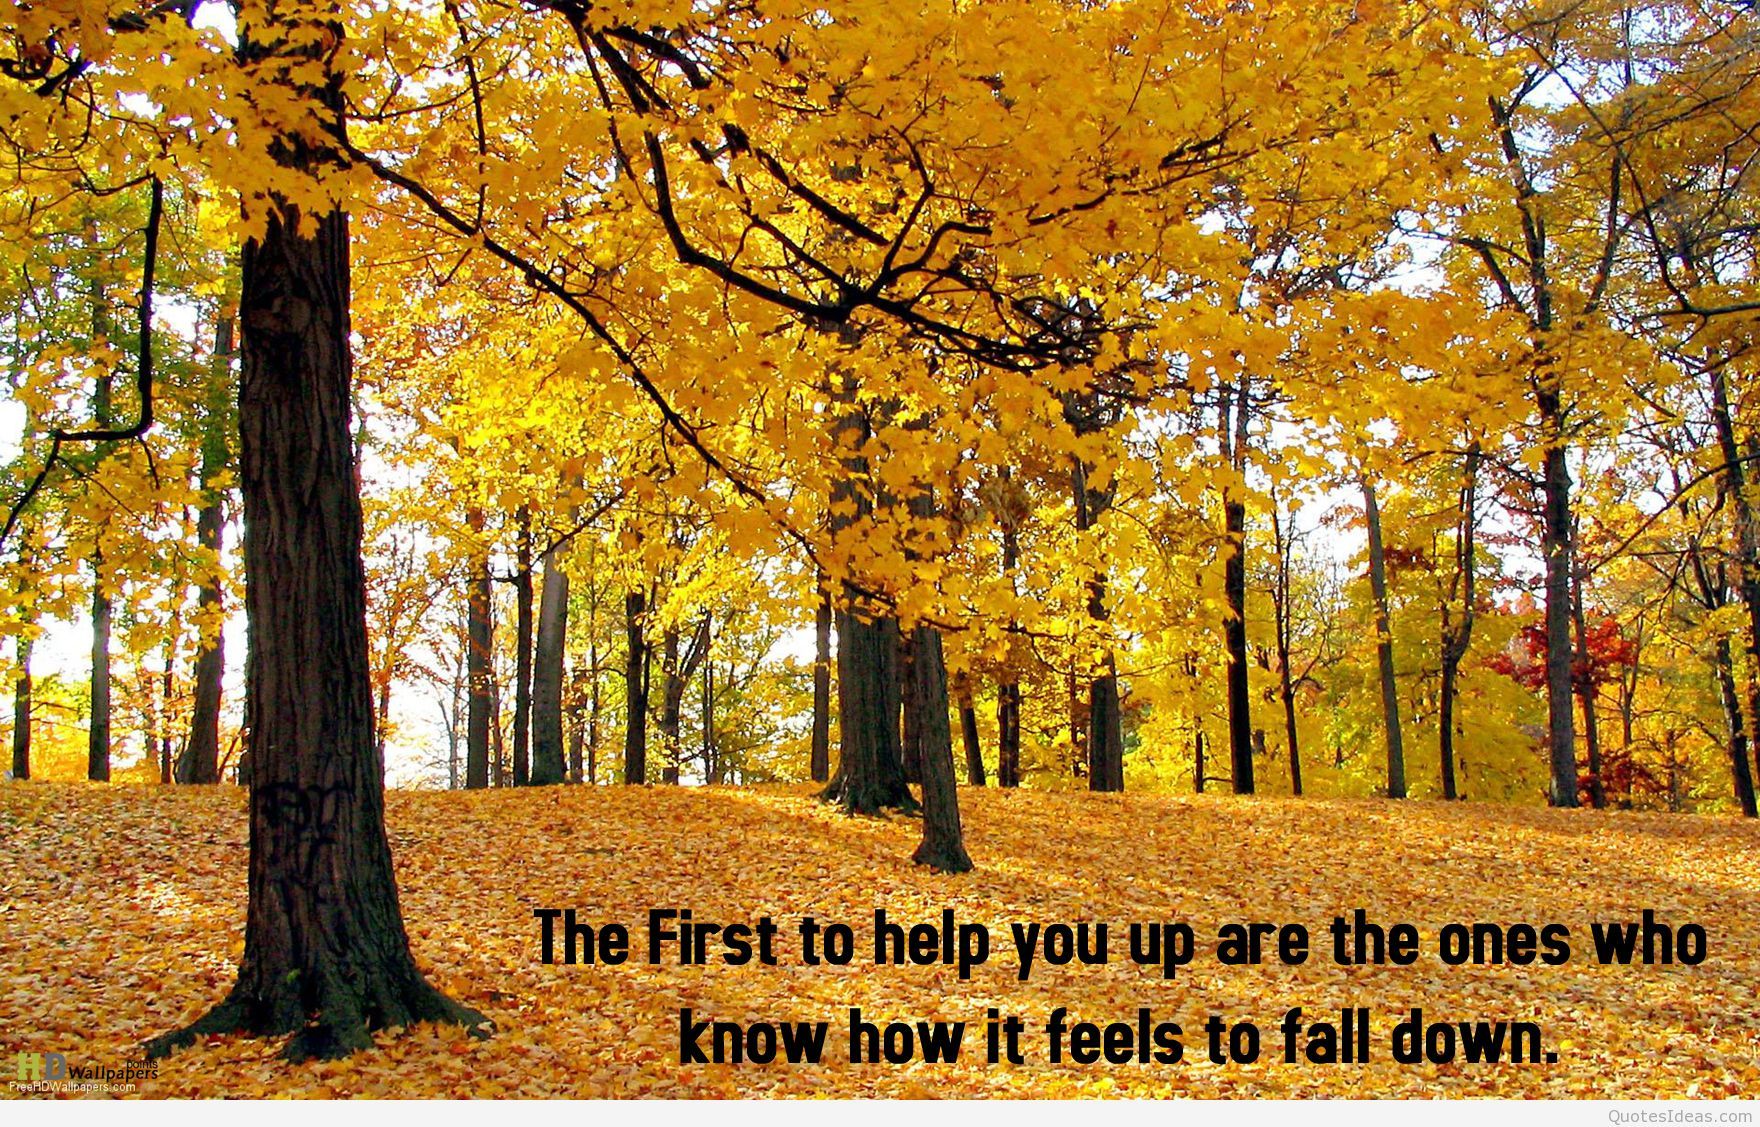 Autumn wallpaper quotes HD and autumn sayings messages